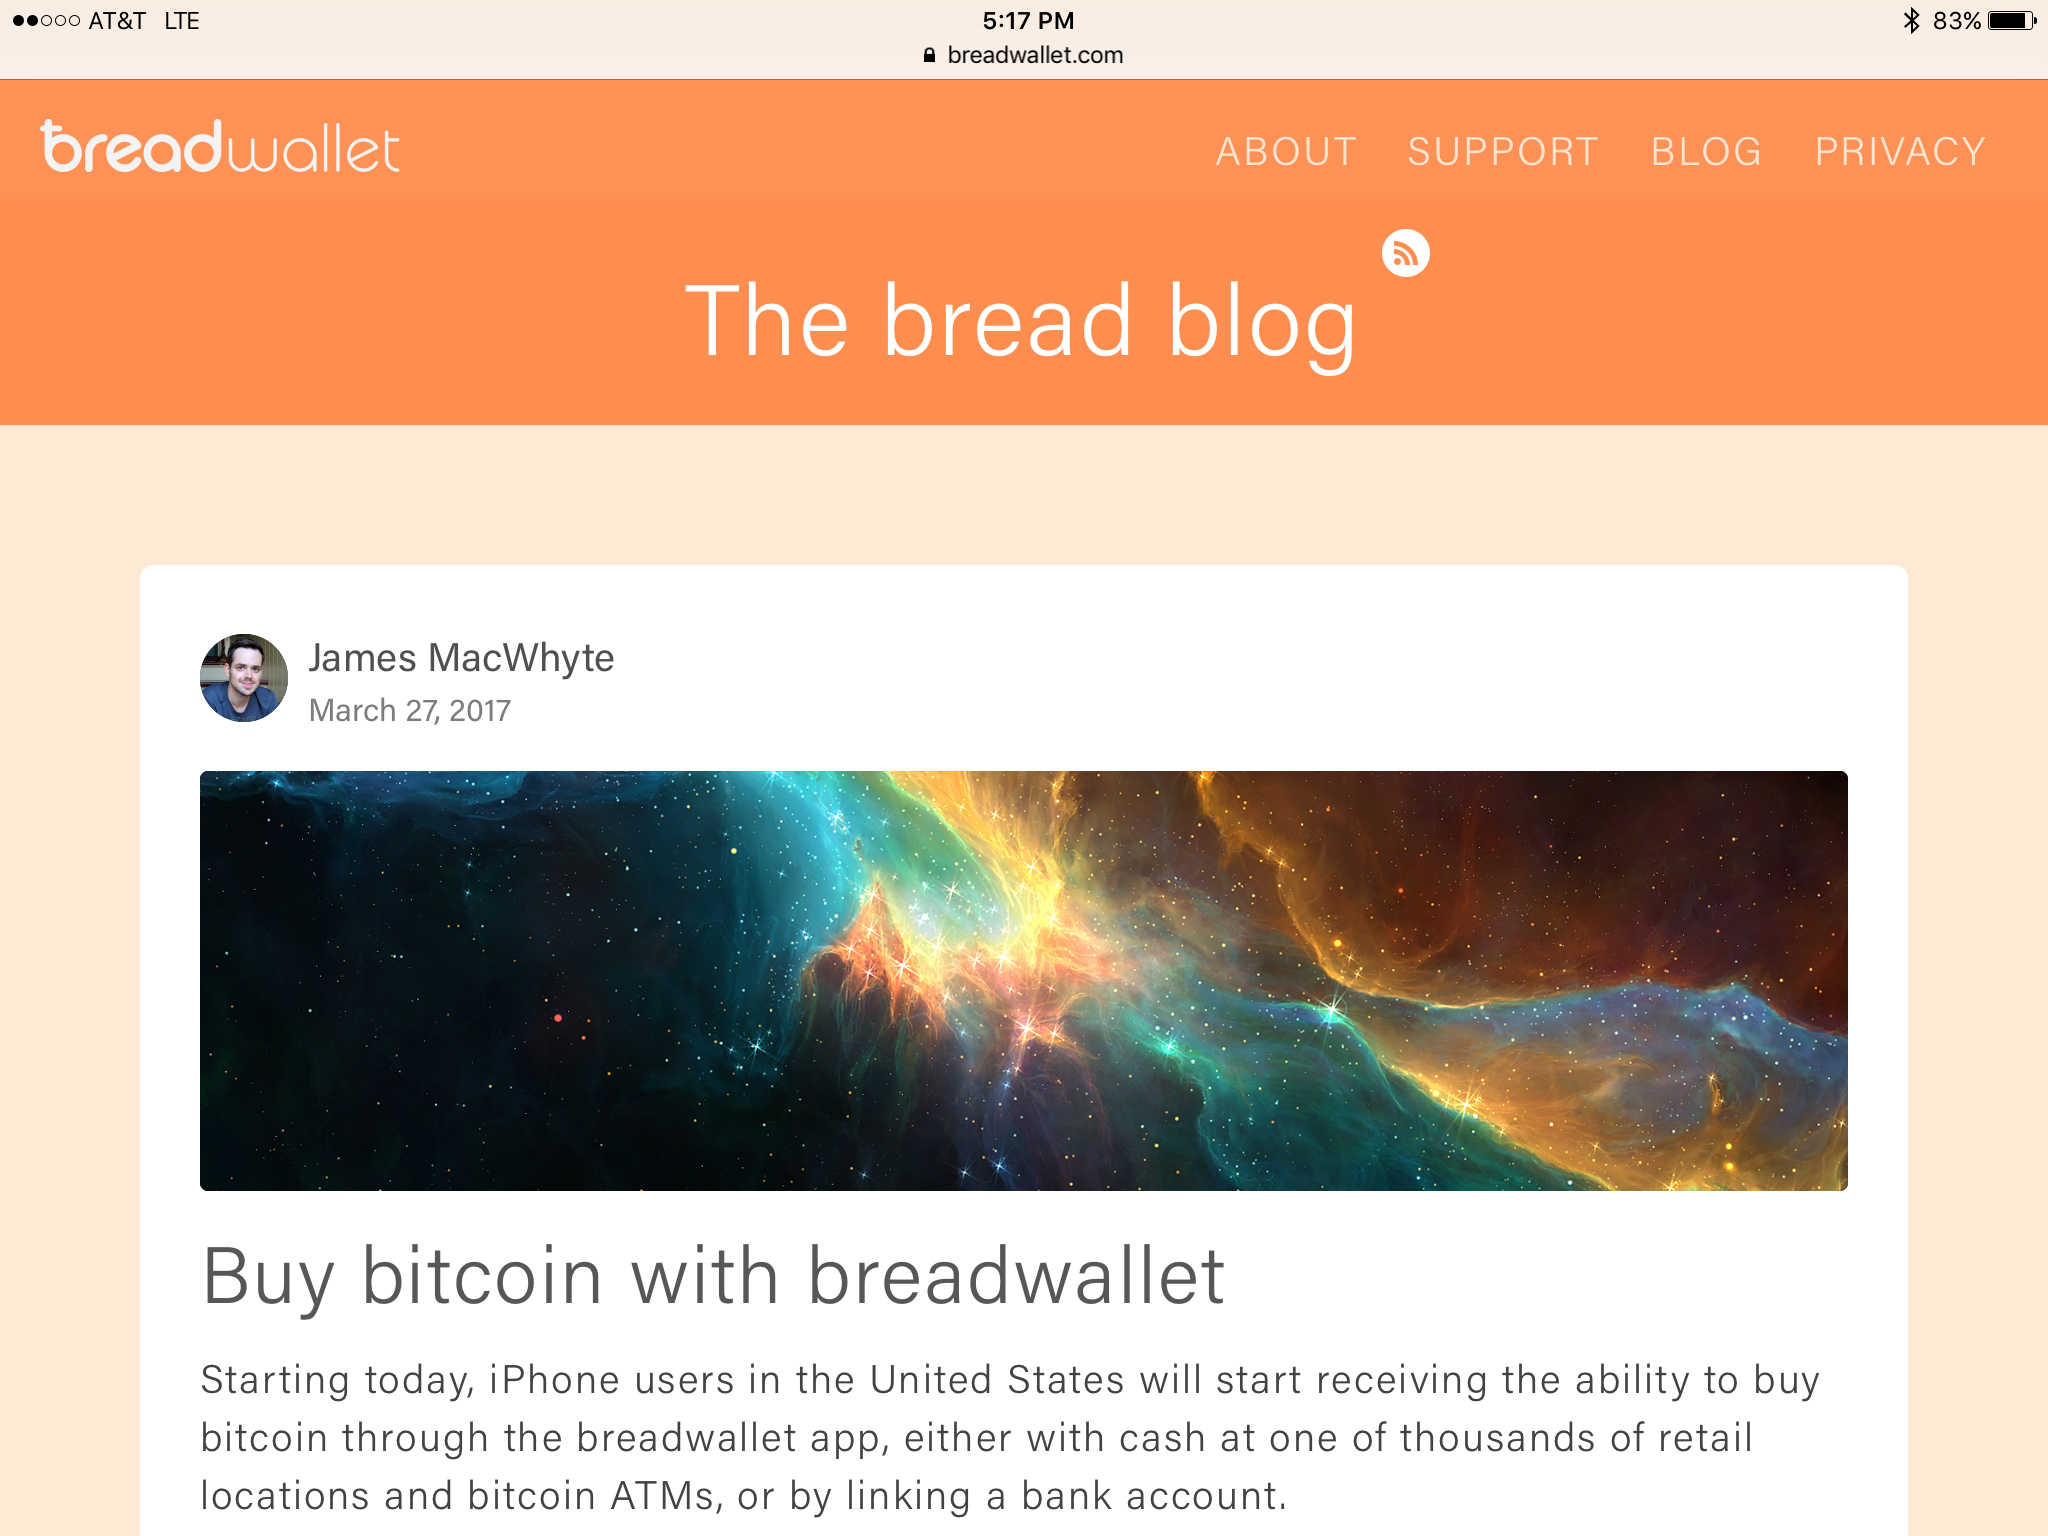 how to buy bitcoin with breadwallet